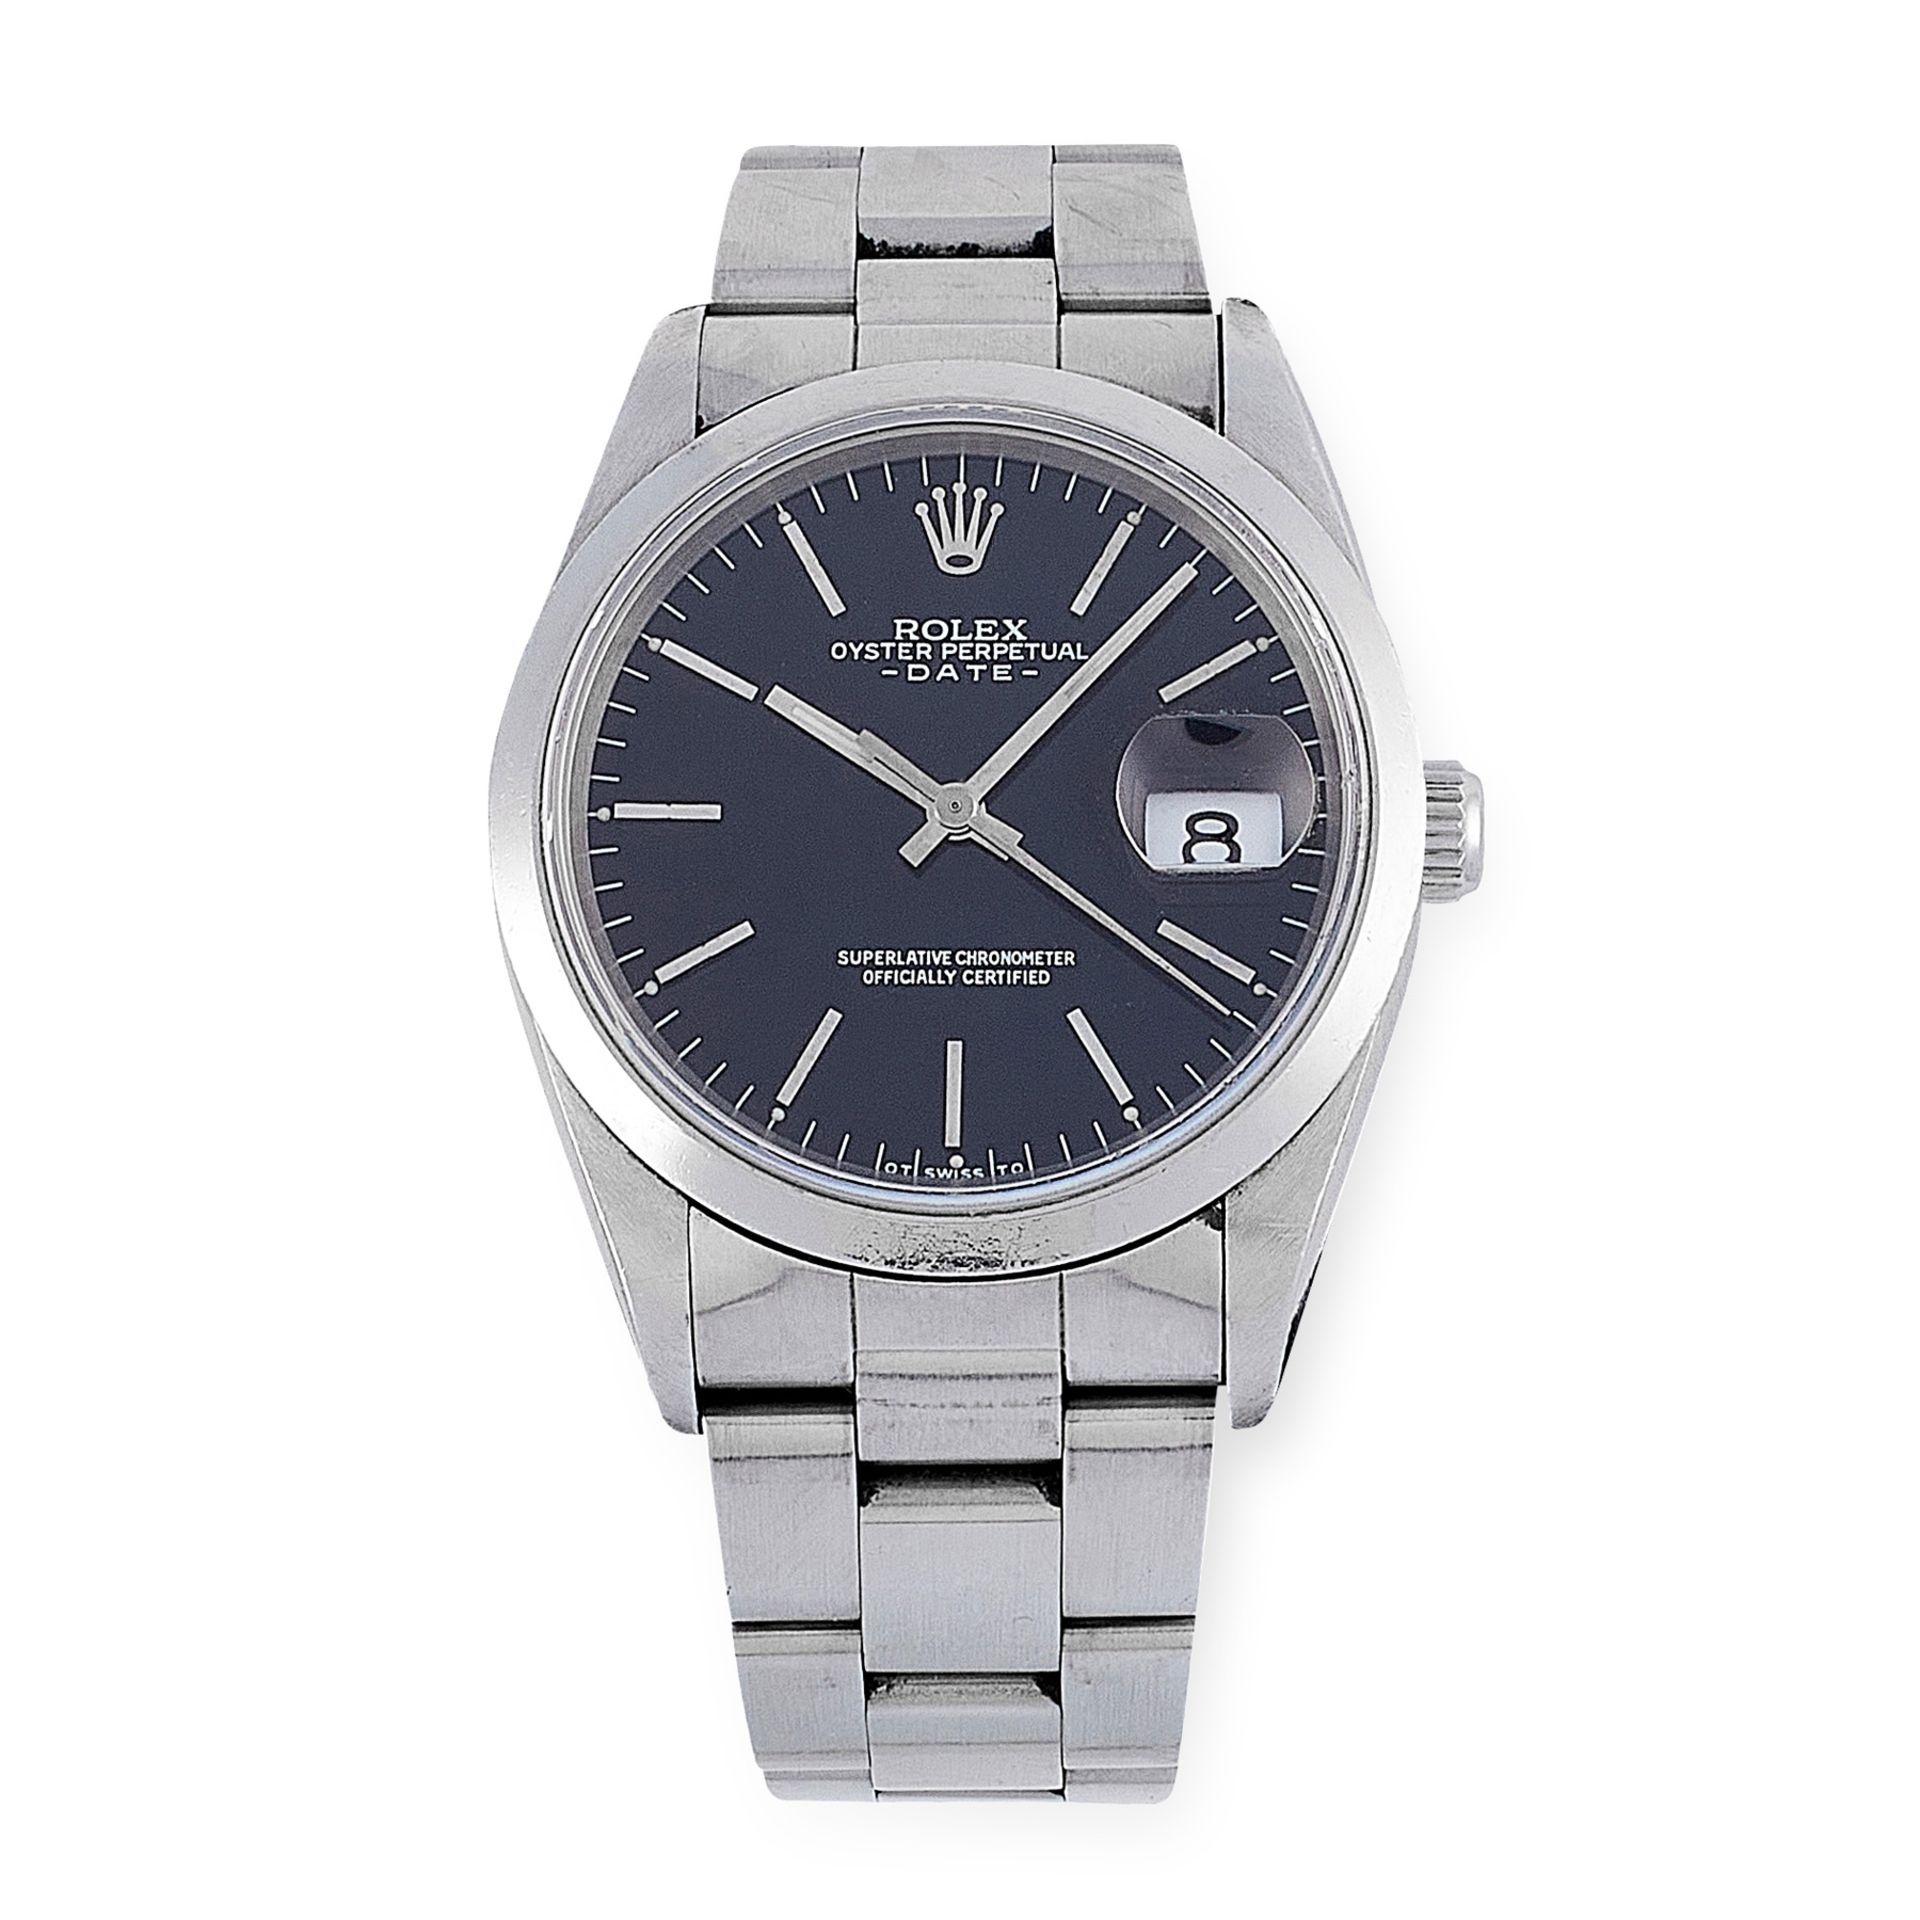 A ROLEX OYSTER PERPETUAL DATE WRIST WATCH in stainless steel, automatic movement, 34mm case, black